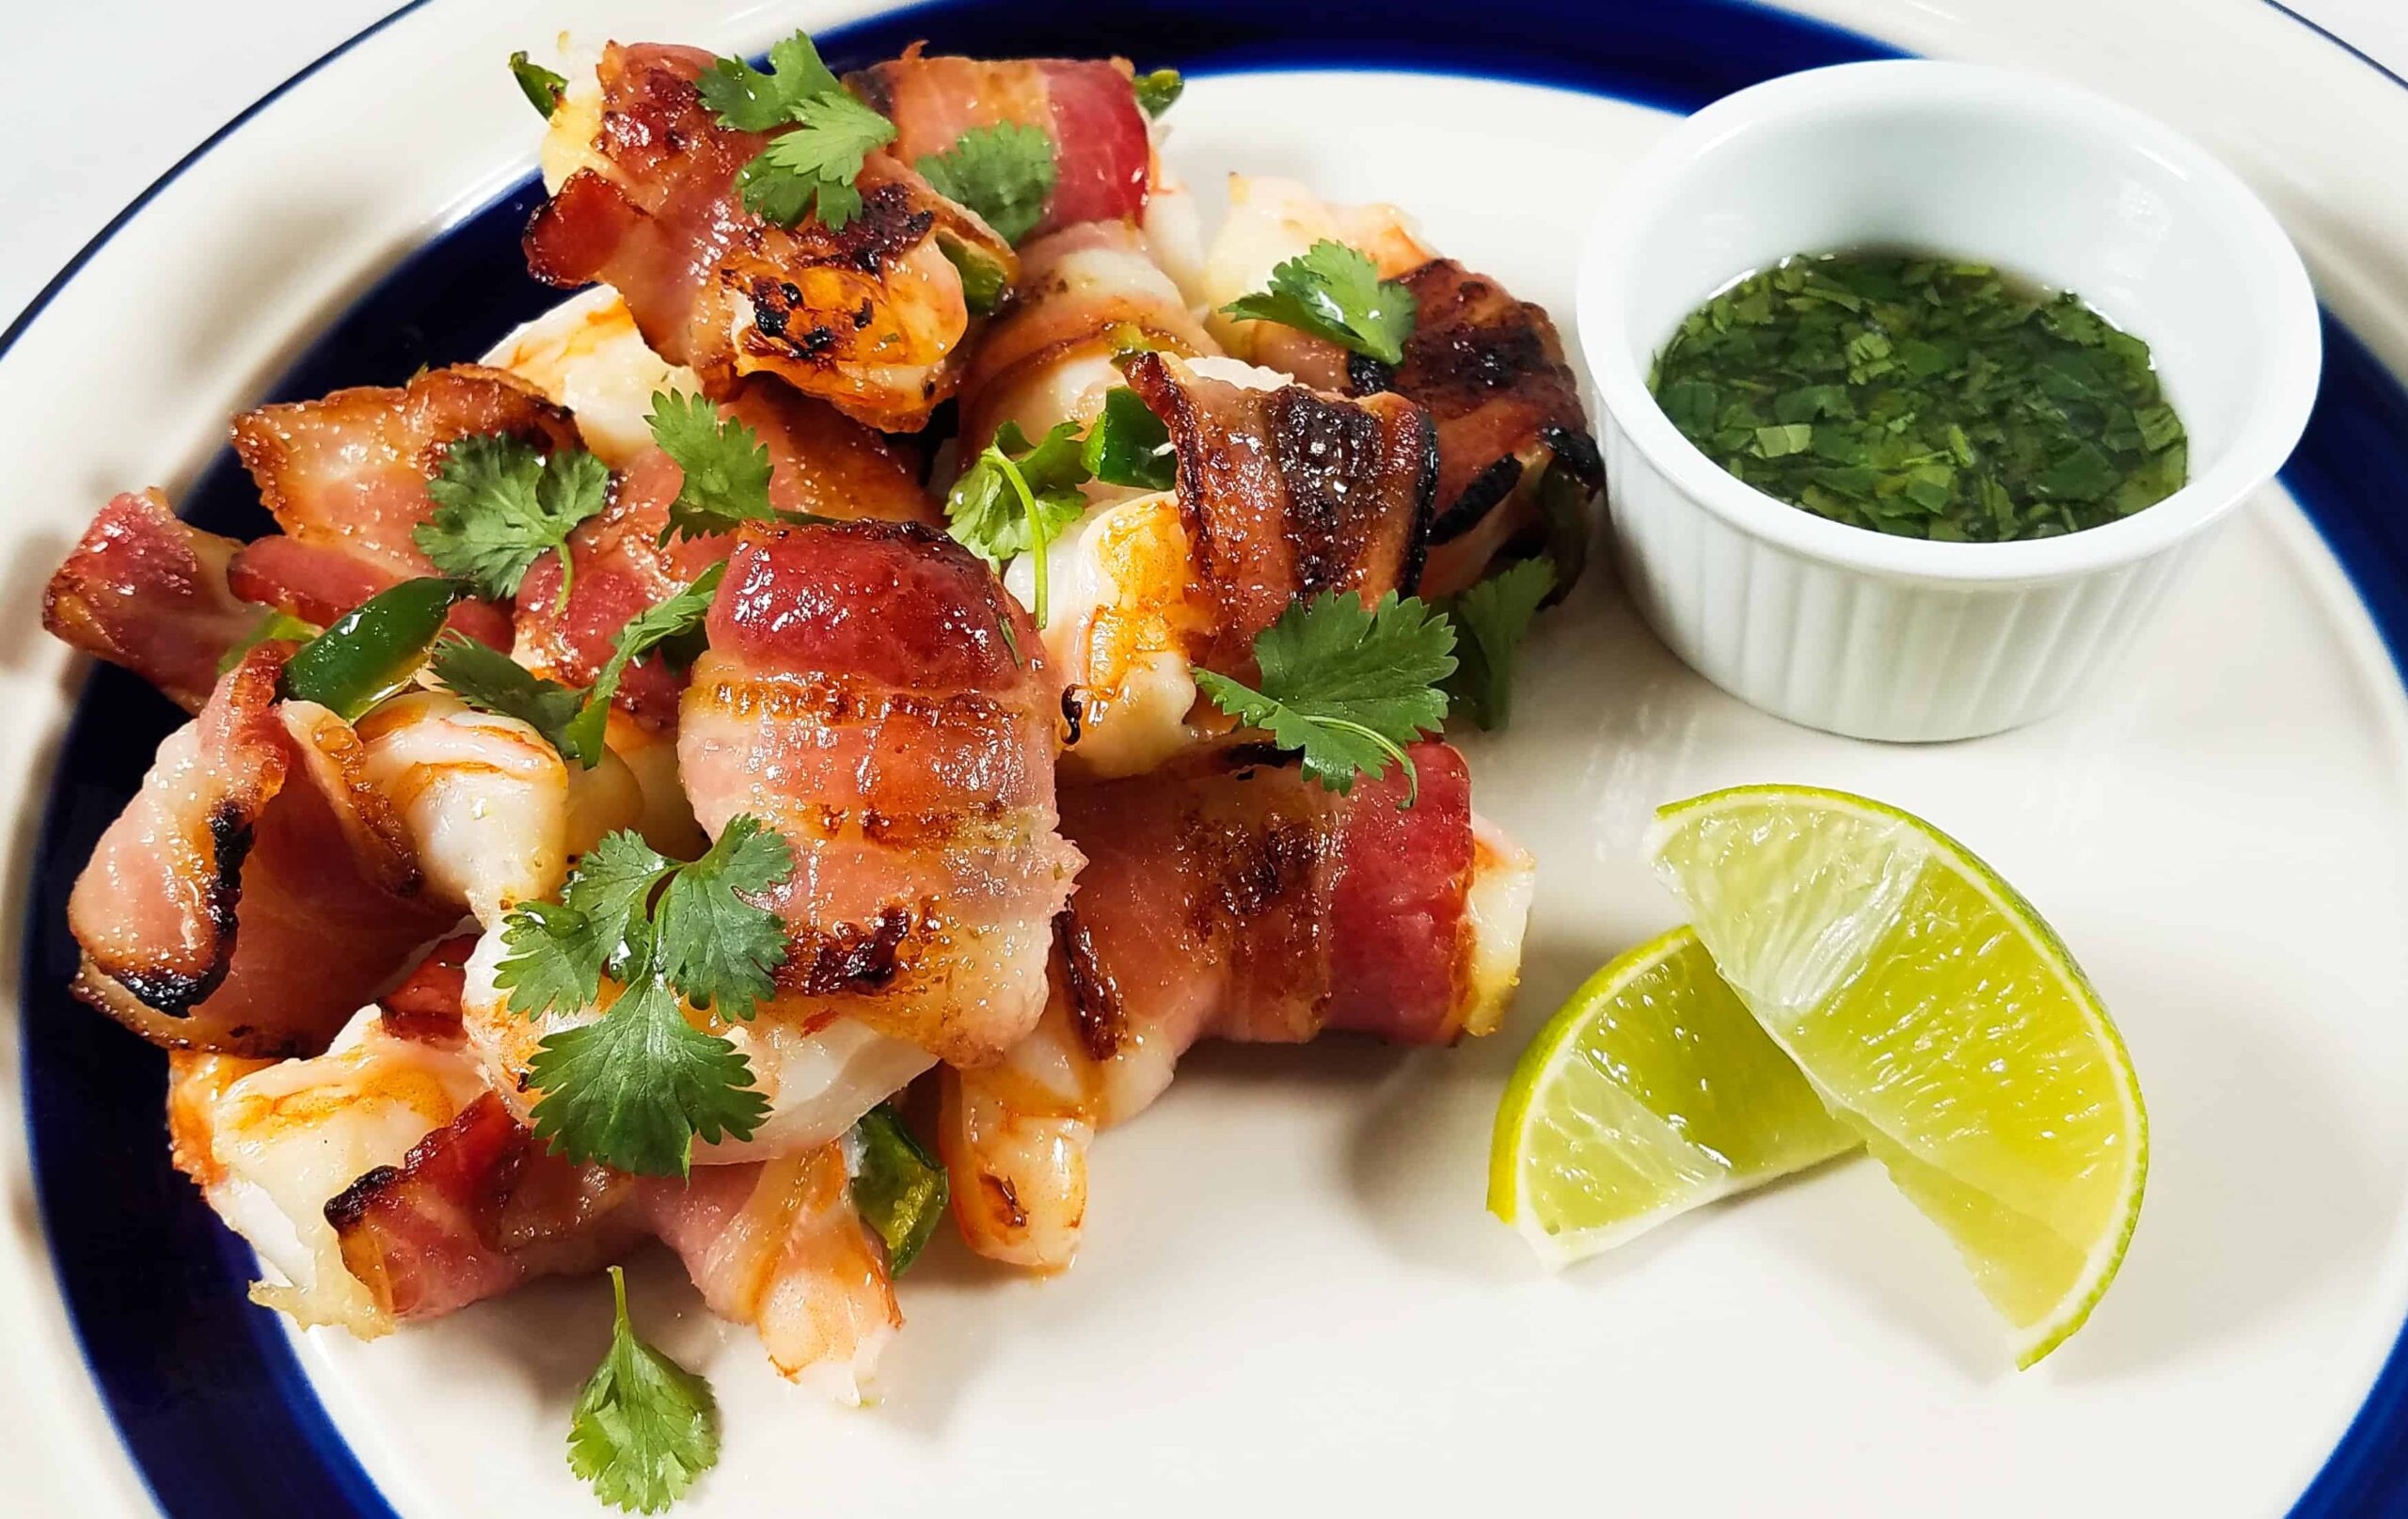 Tailgate At Home With These Amazing Jalapeno Stuffed Shrimp